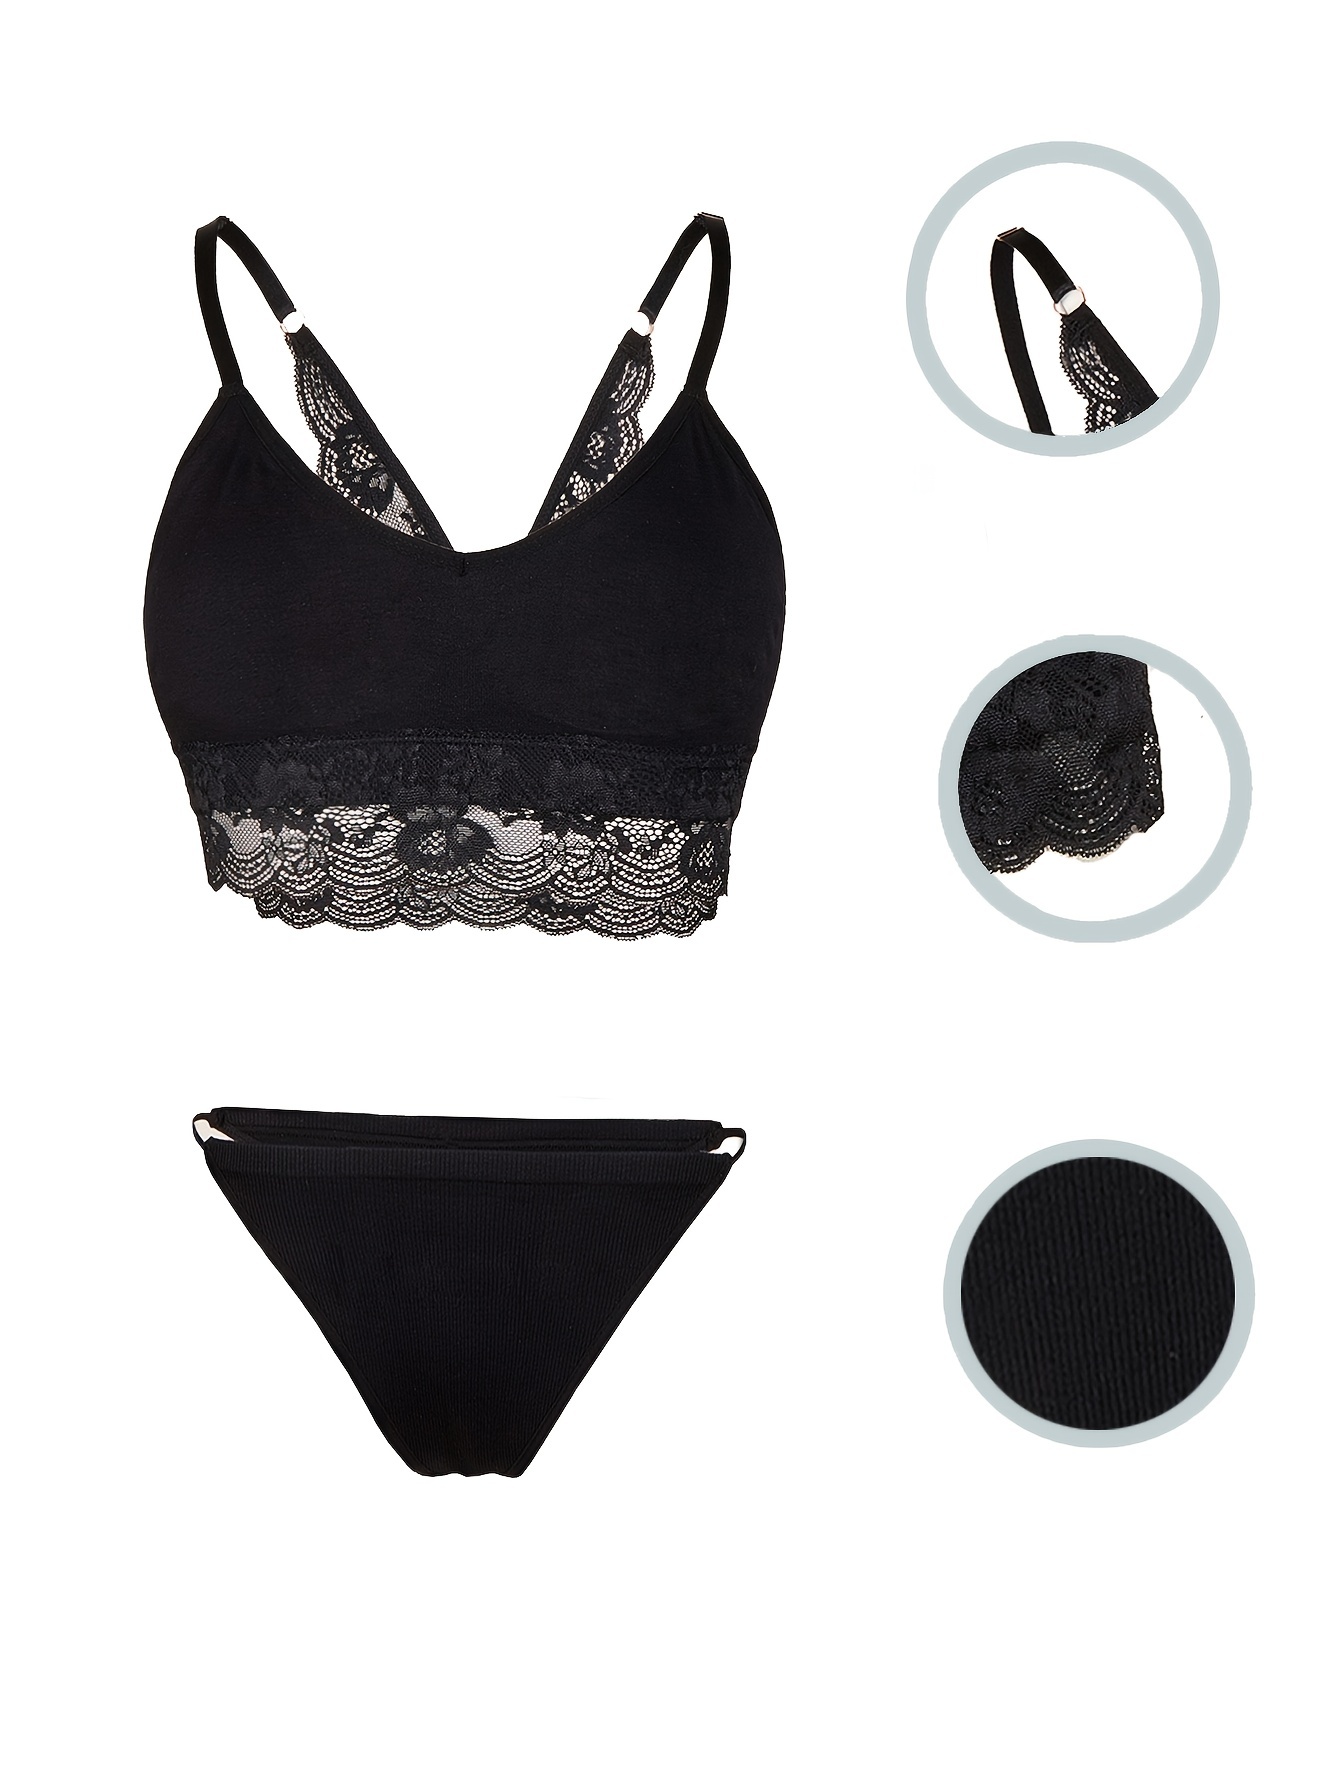 Bralettes and Panties Sets: Lacy, Racerback